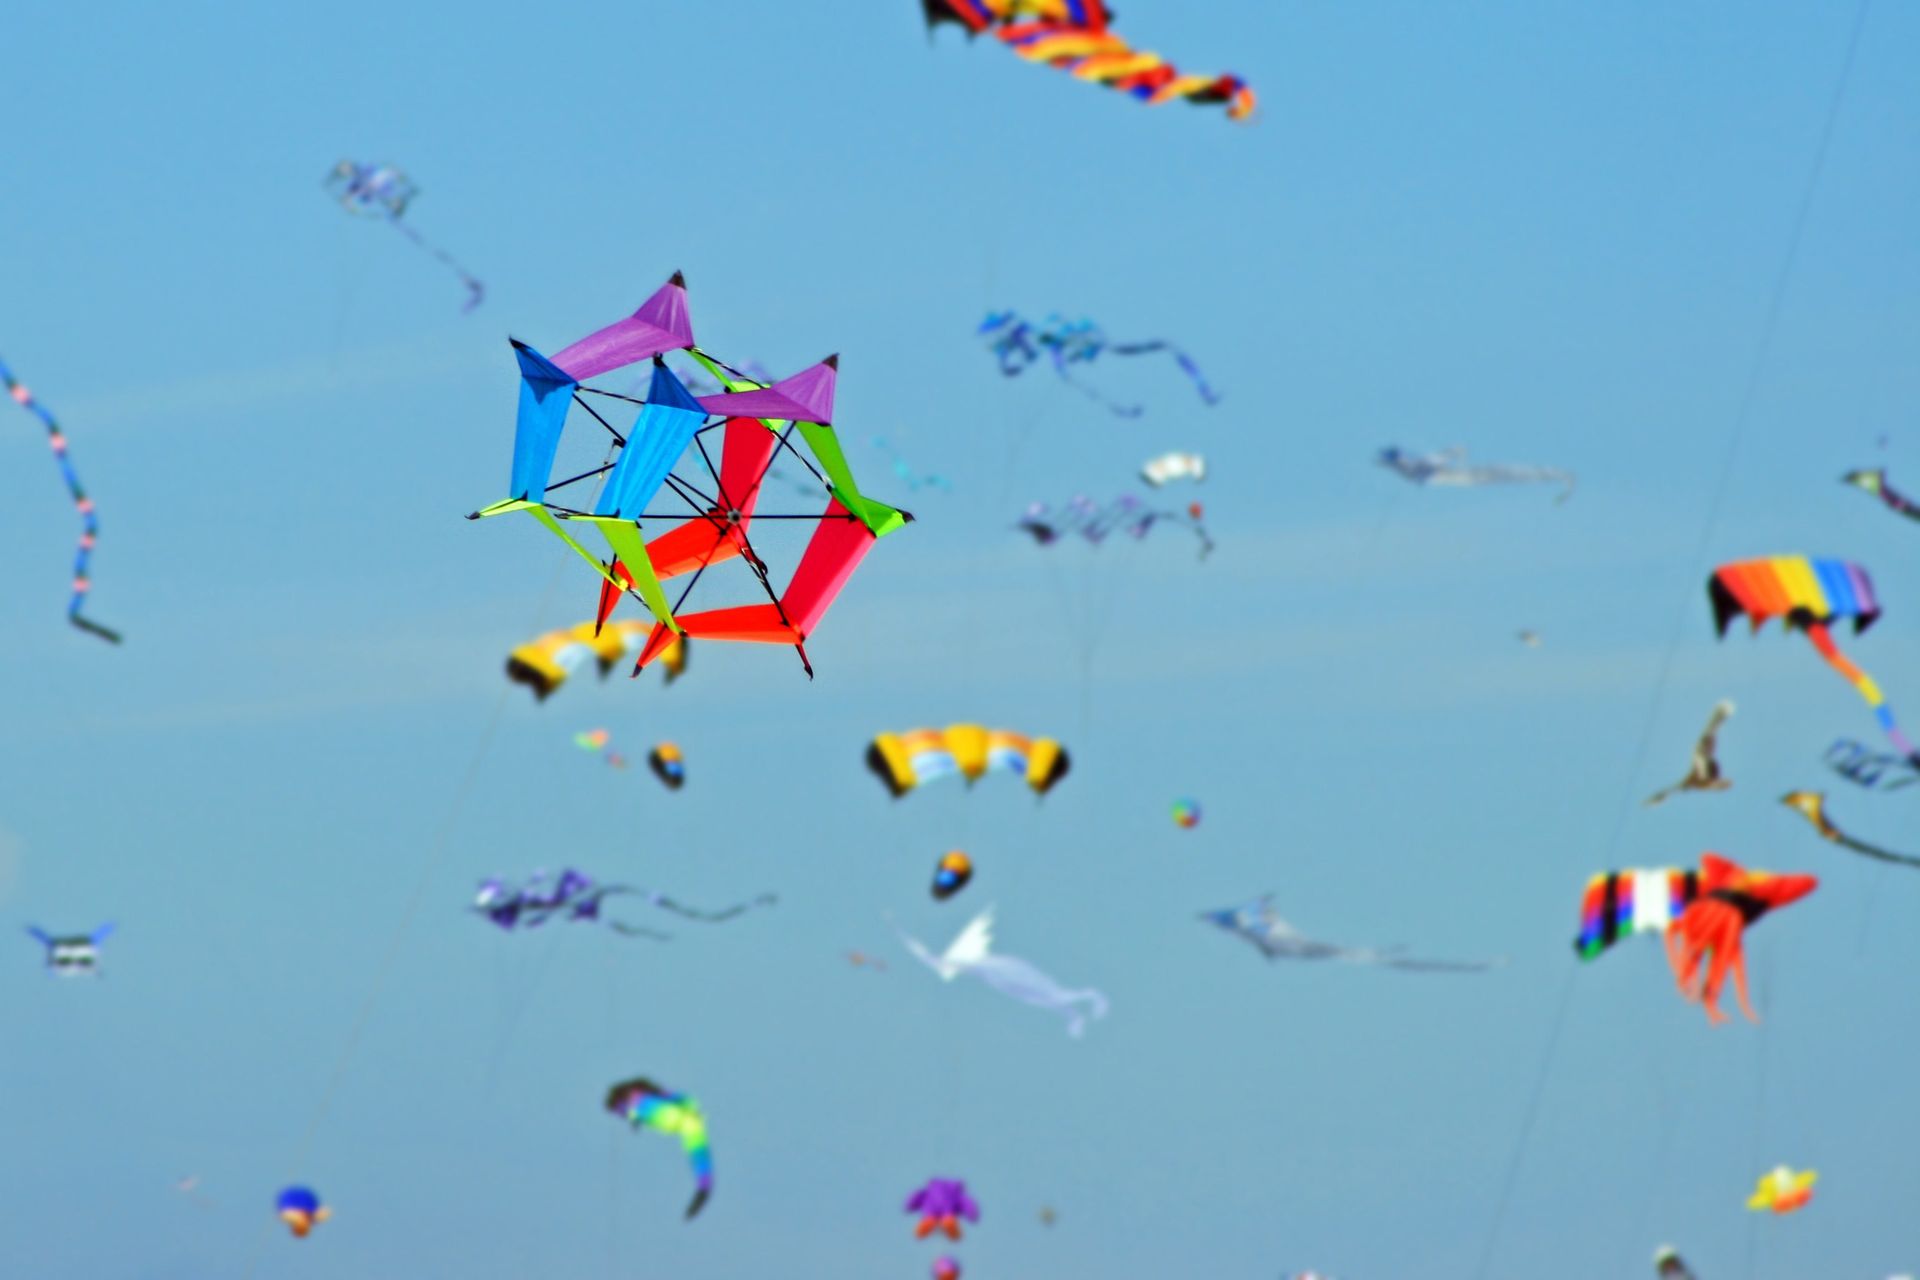 A group of kites flying in the sky.